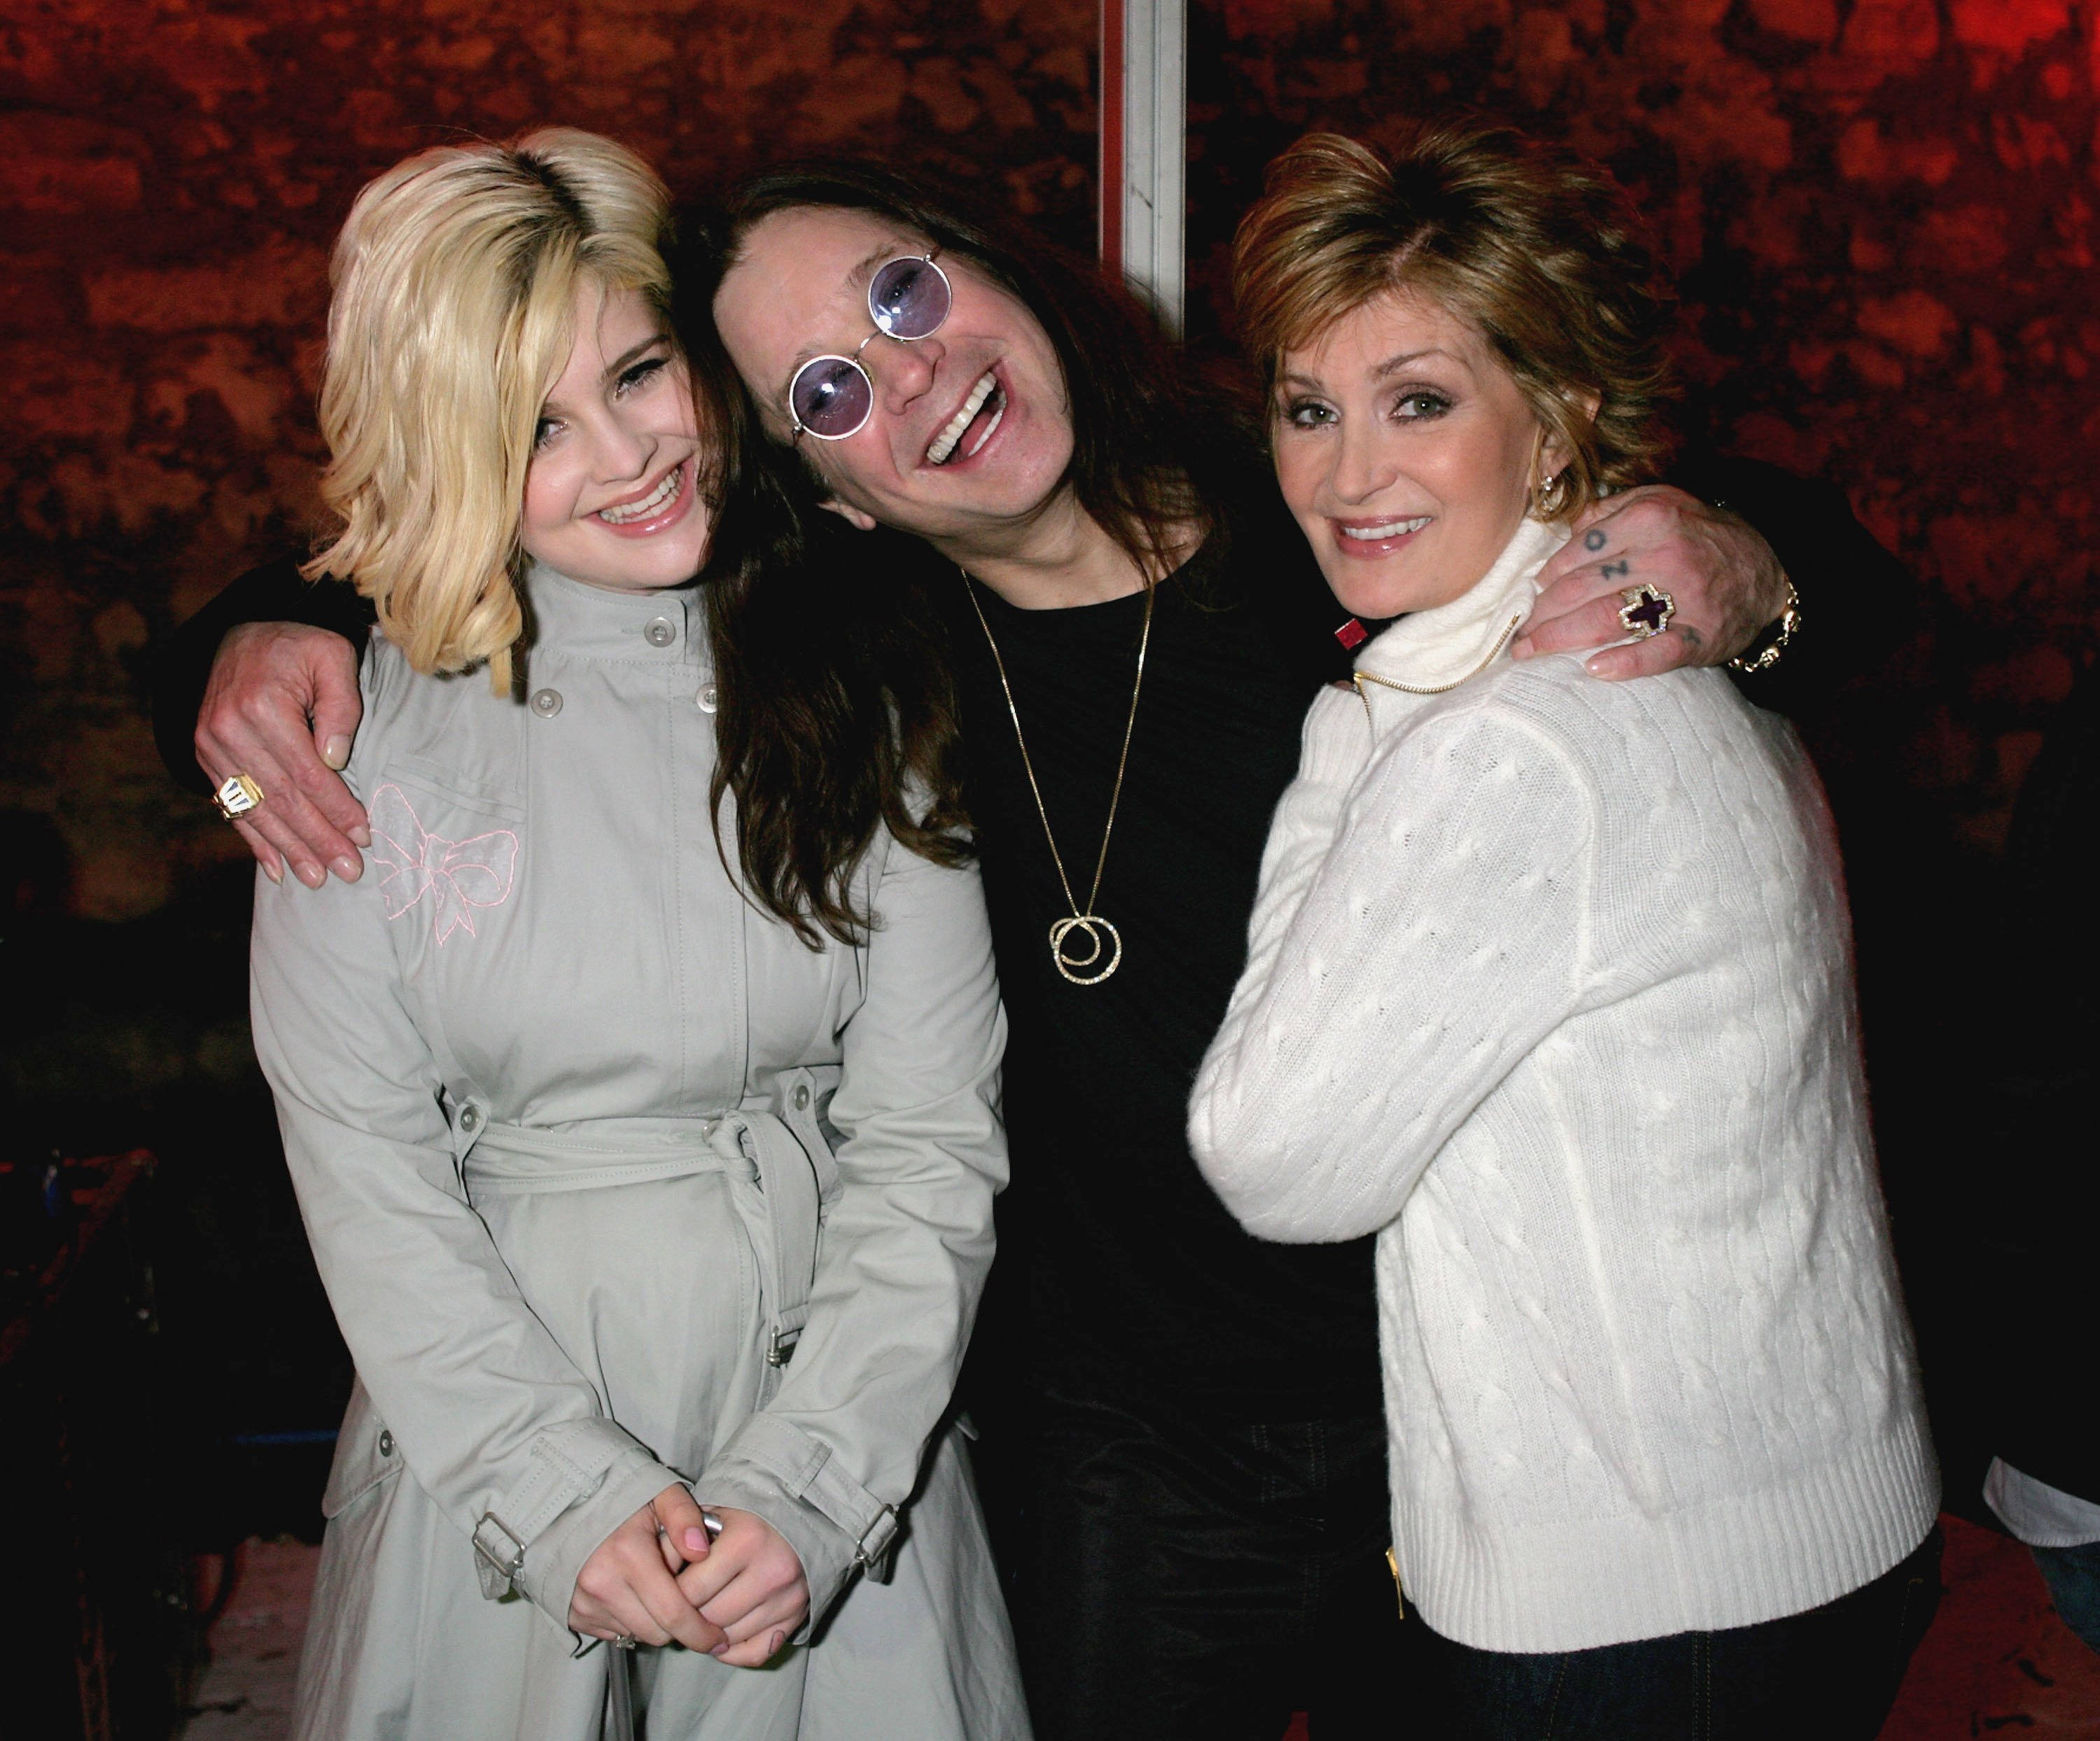 Kelly Osbourne, Ozzy Osbourne and Sharon Osbourne attend The Prince's Trust 30th Live concert which took place at the Tower of London on May 20, 2006 in London, England. | Source: Getty Images